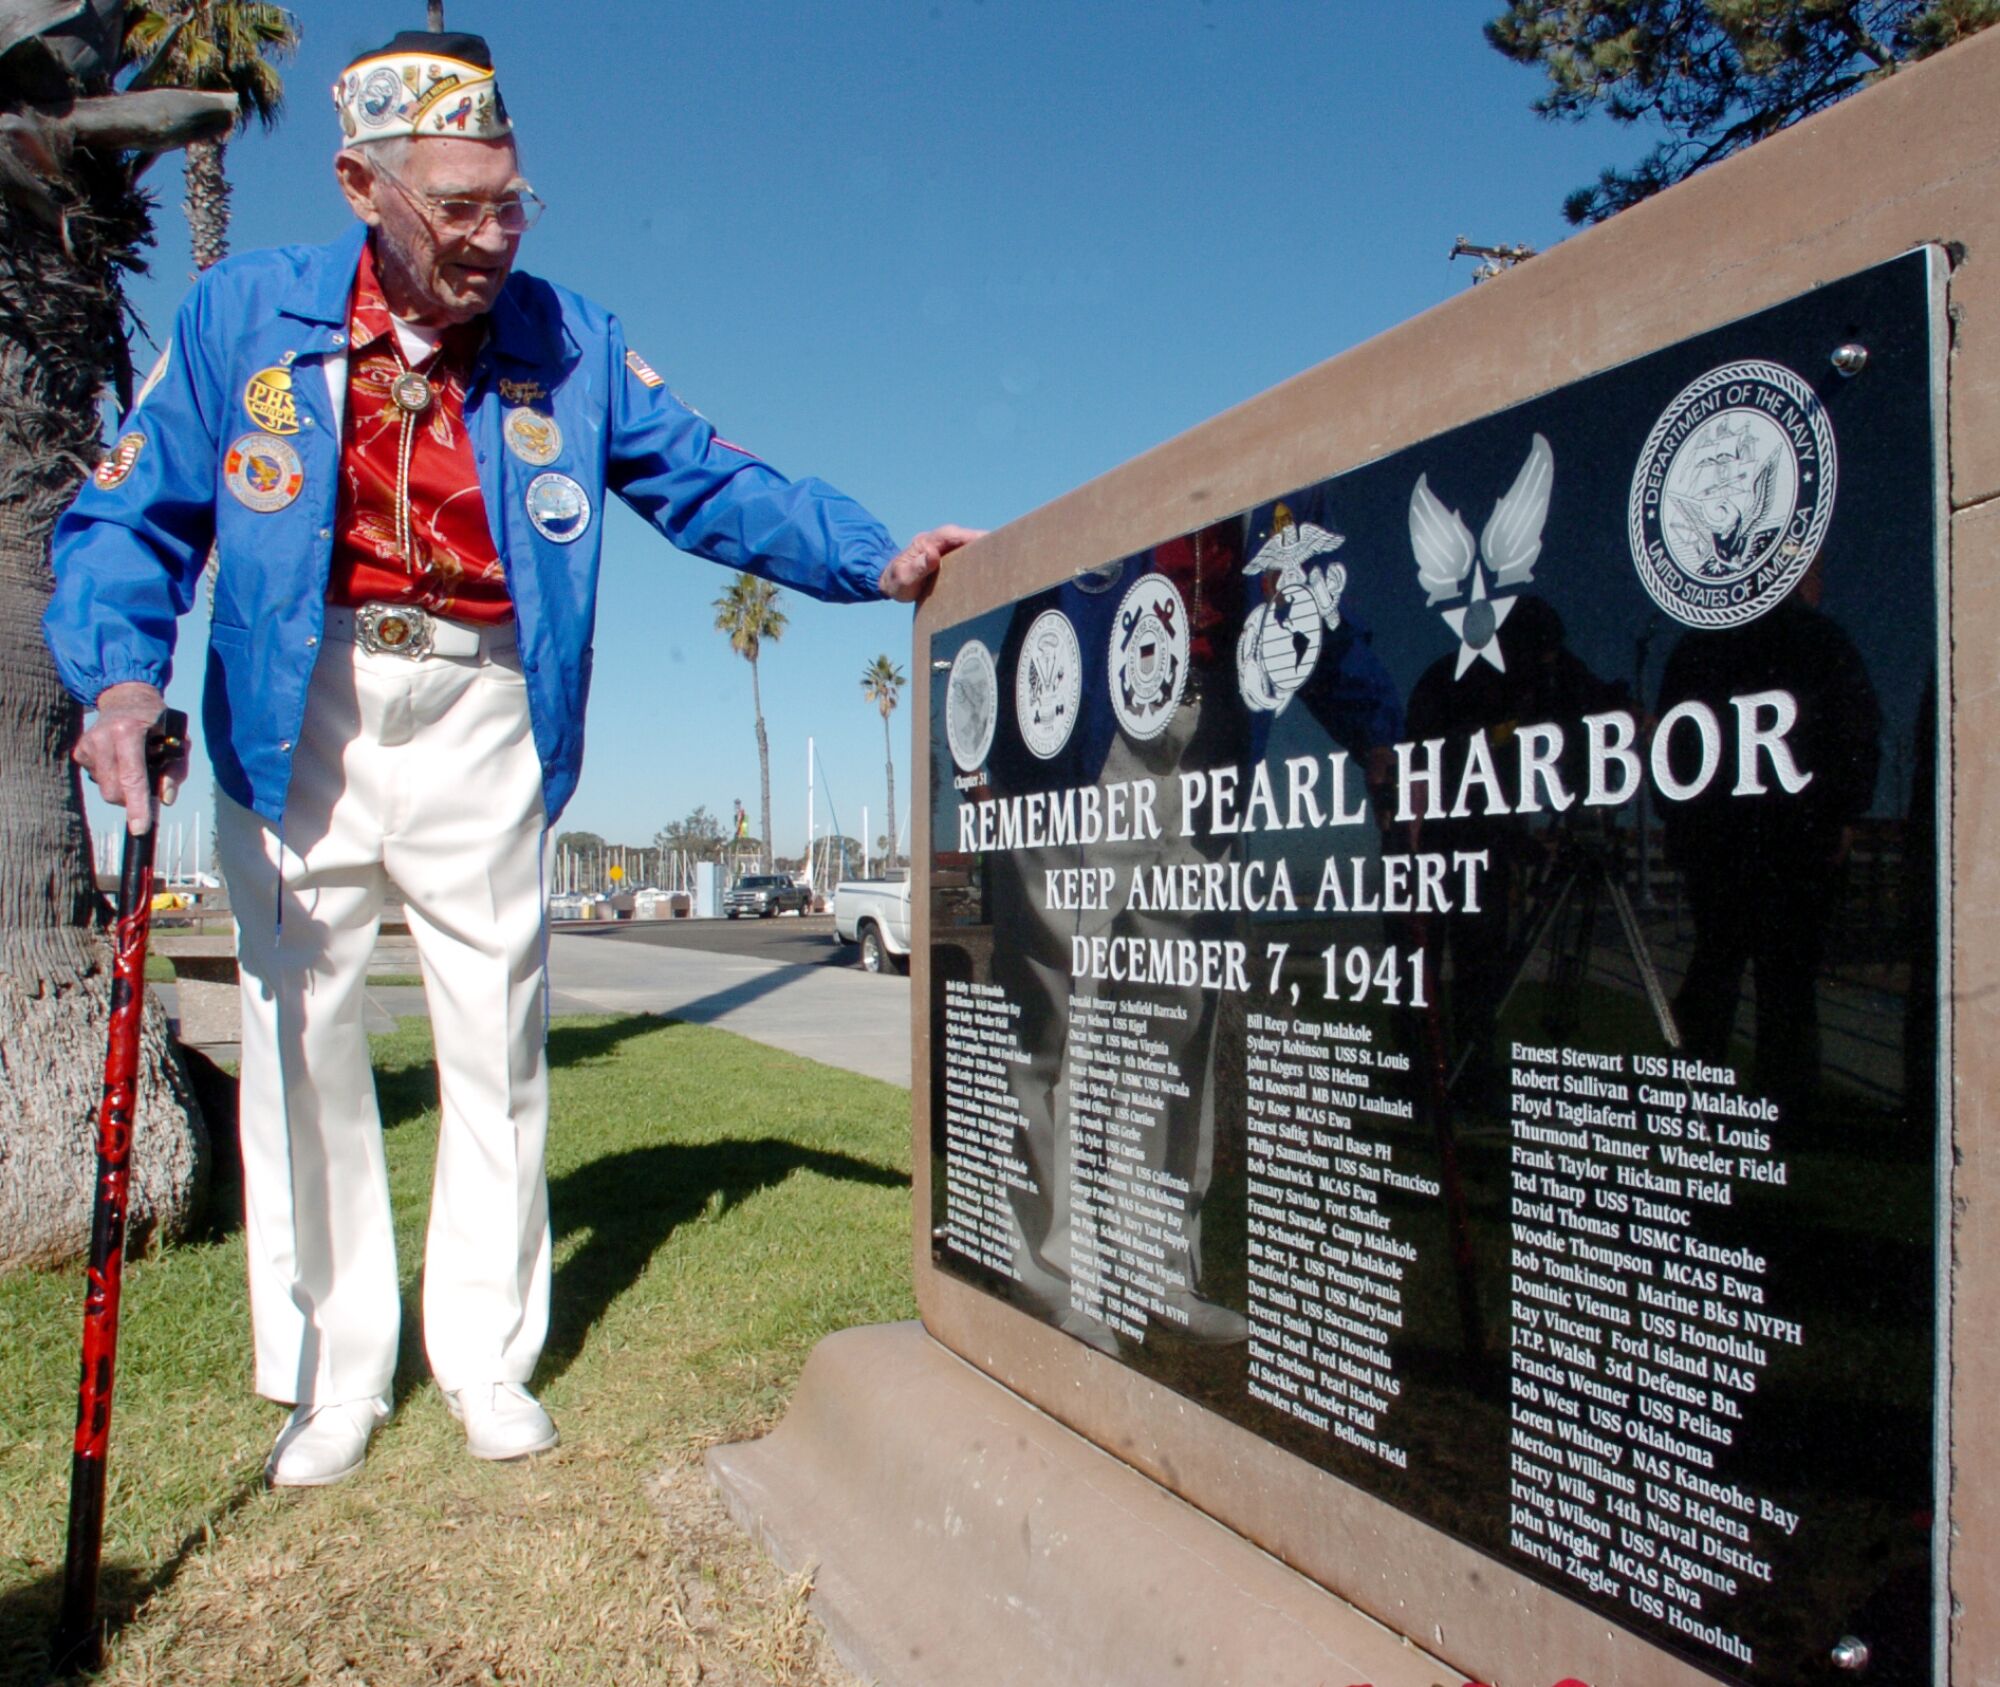 Pearl Harbor Survivor Ted Roosvall, age 86, of San Marcos, looks at rememberance plaque